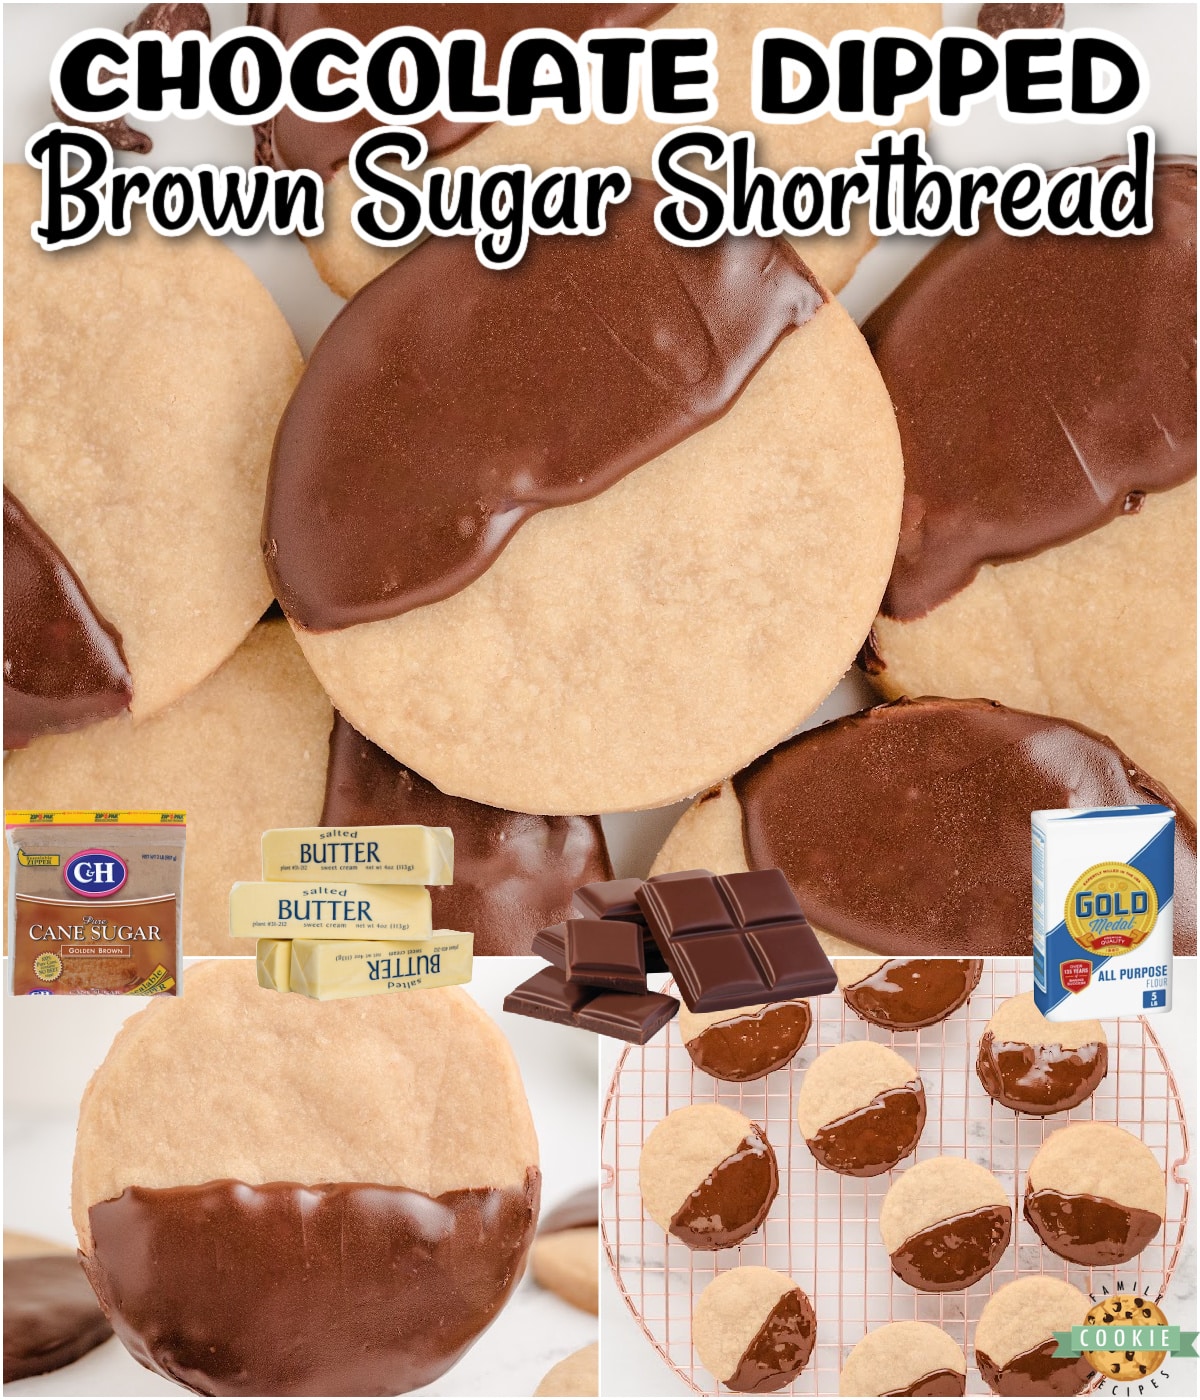 Brown Sugar Shortbread cookies are tender, buttery shortbread made with brown sugar & dipped in chocolate for a perfect shortbread cookie.